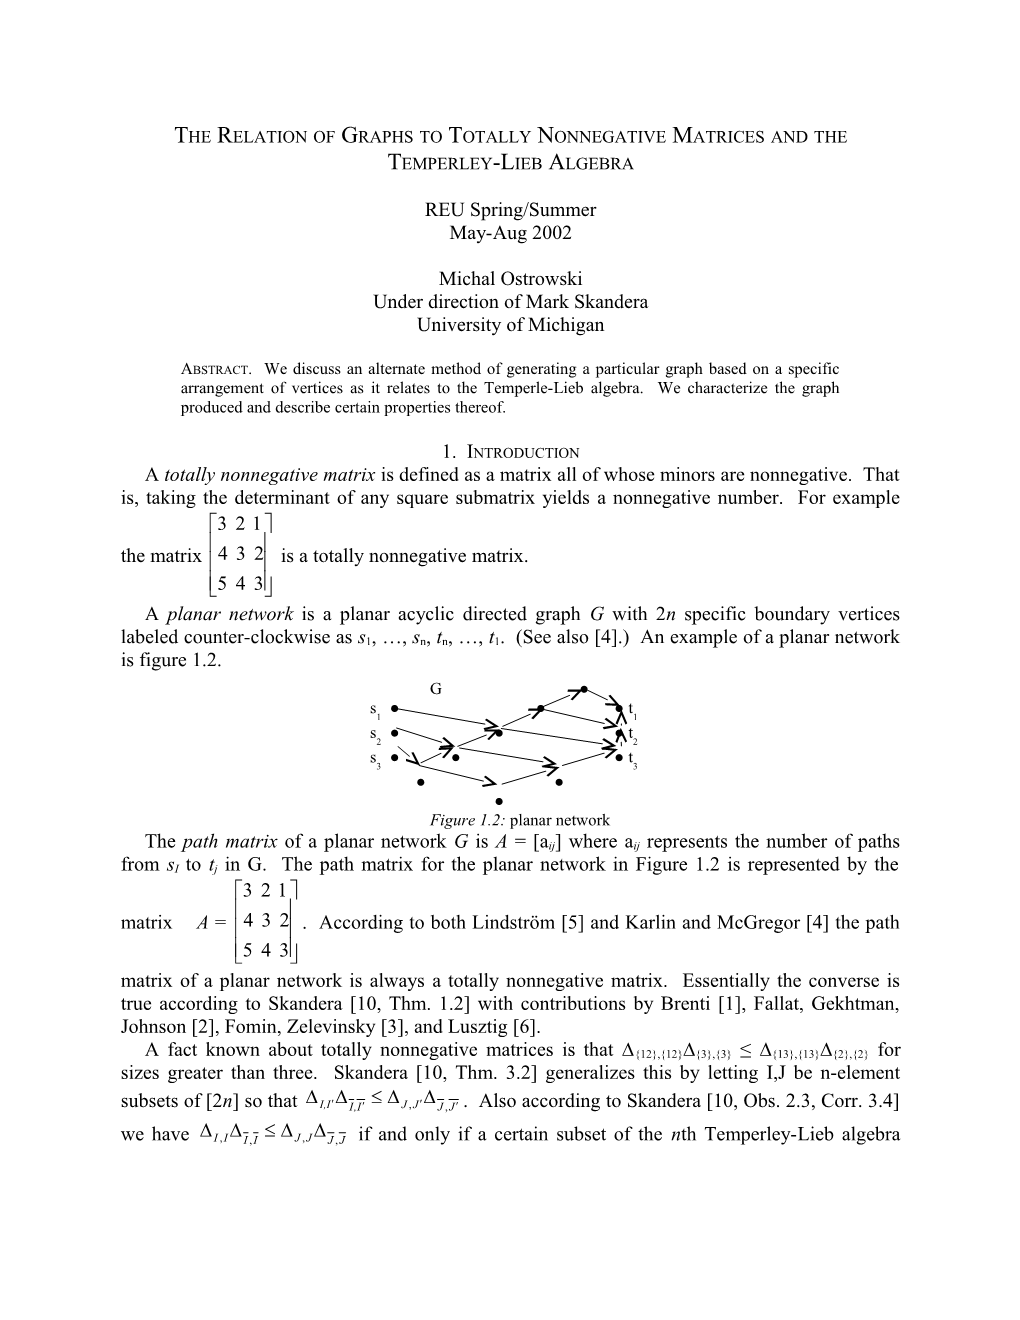 The Relation of Graphs to Totally Nonnegative Matrices and the Temperley-Lieb Algebra